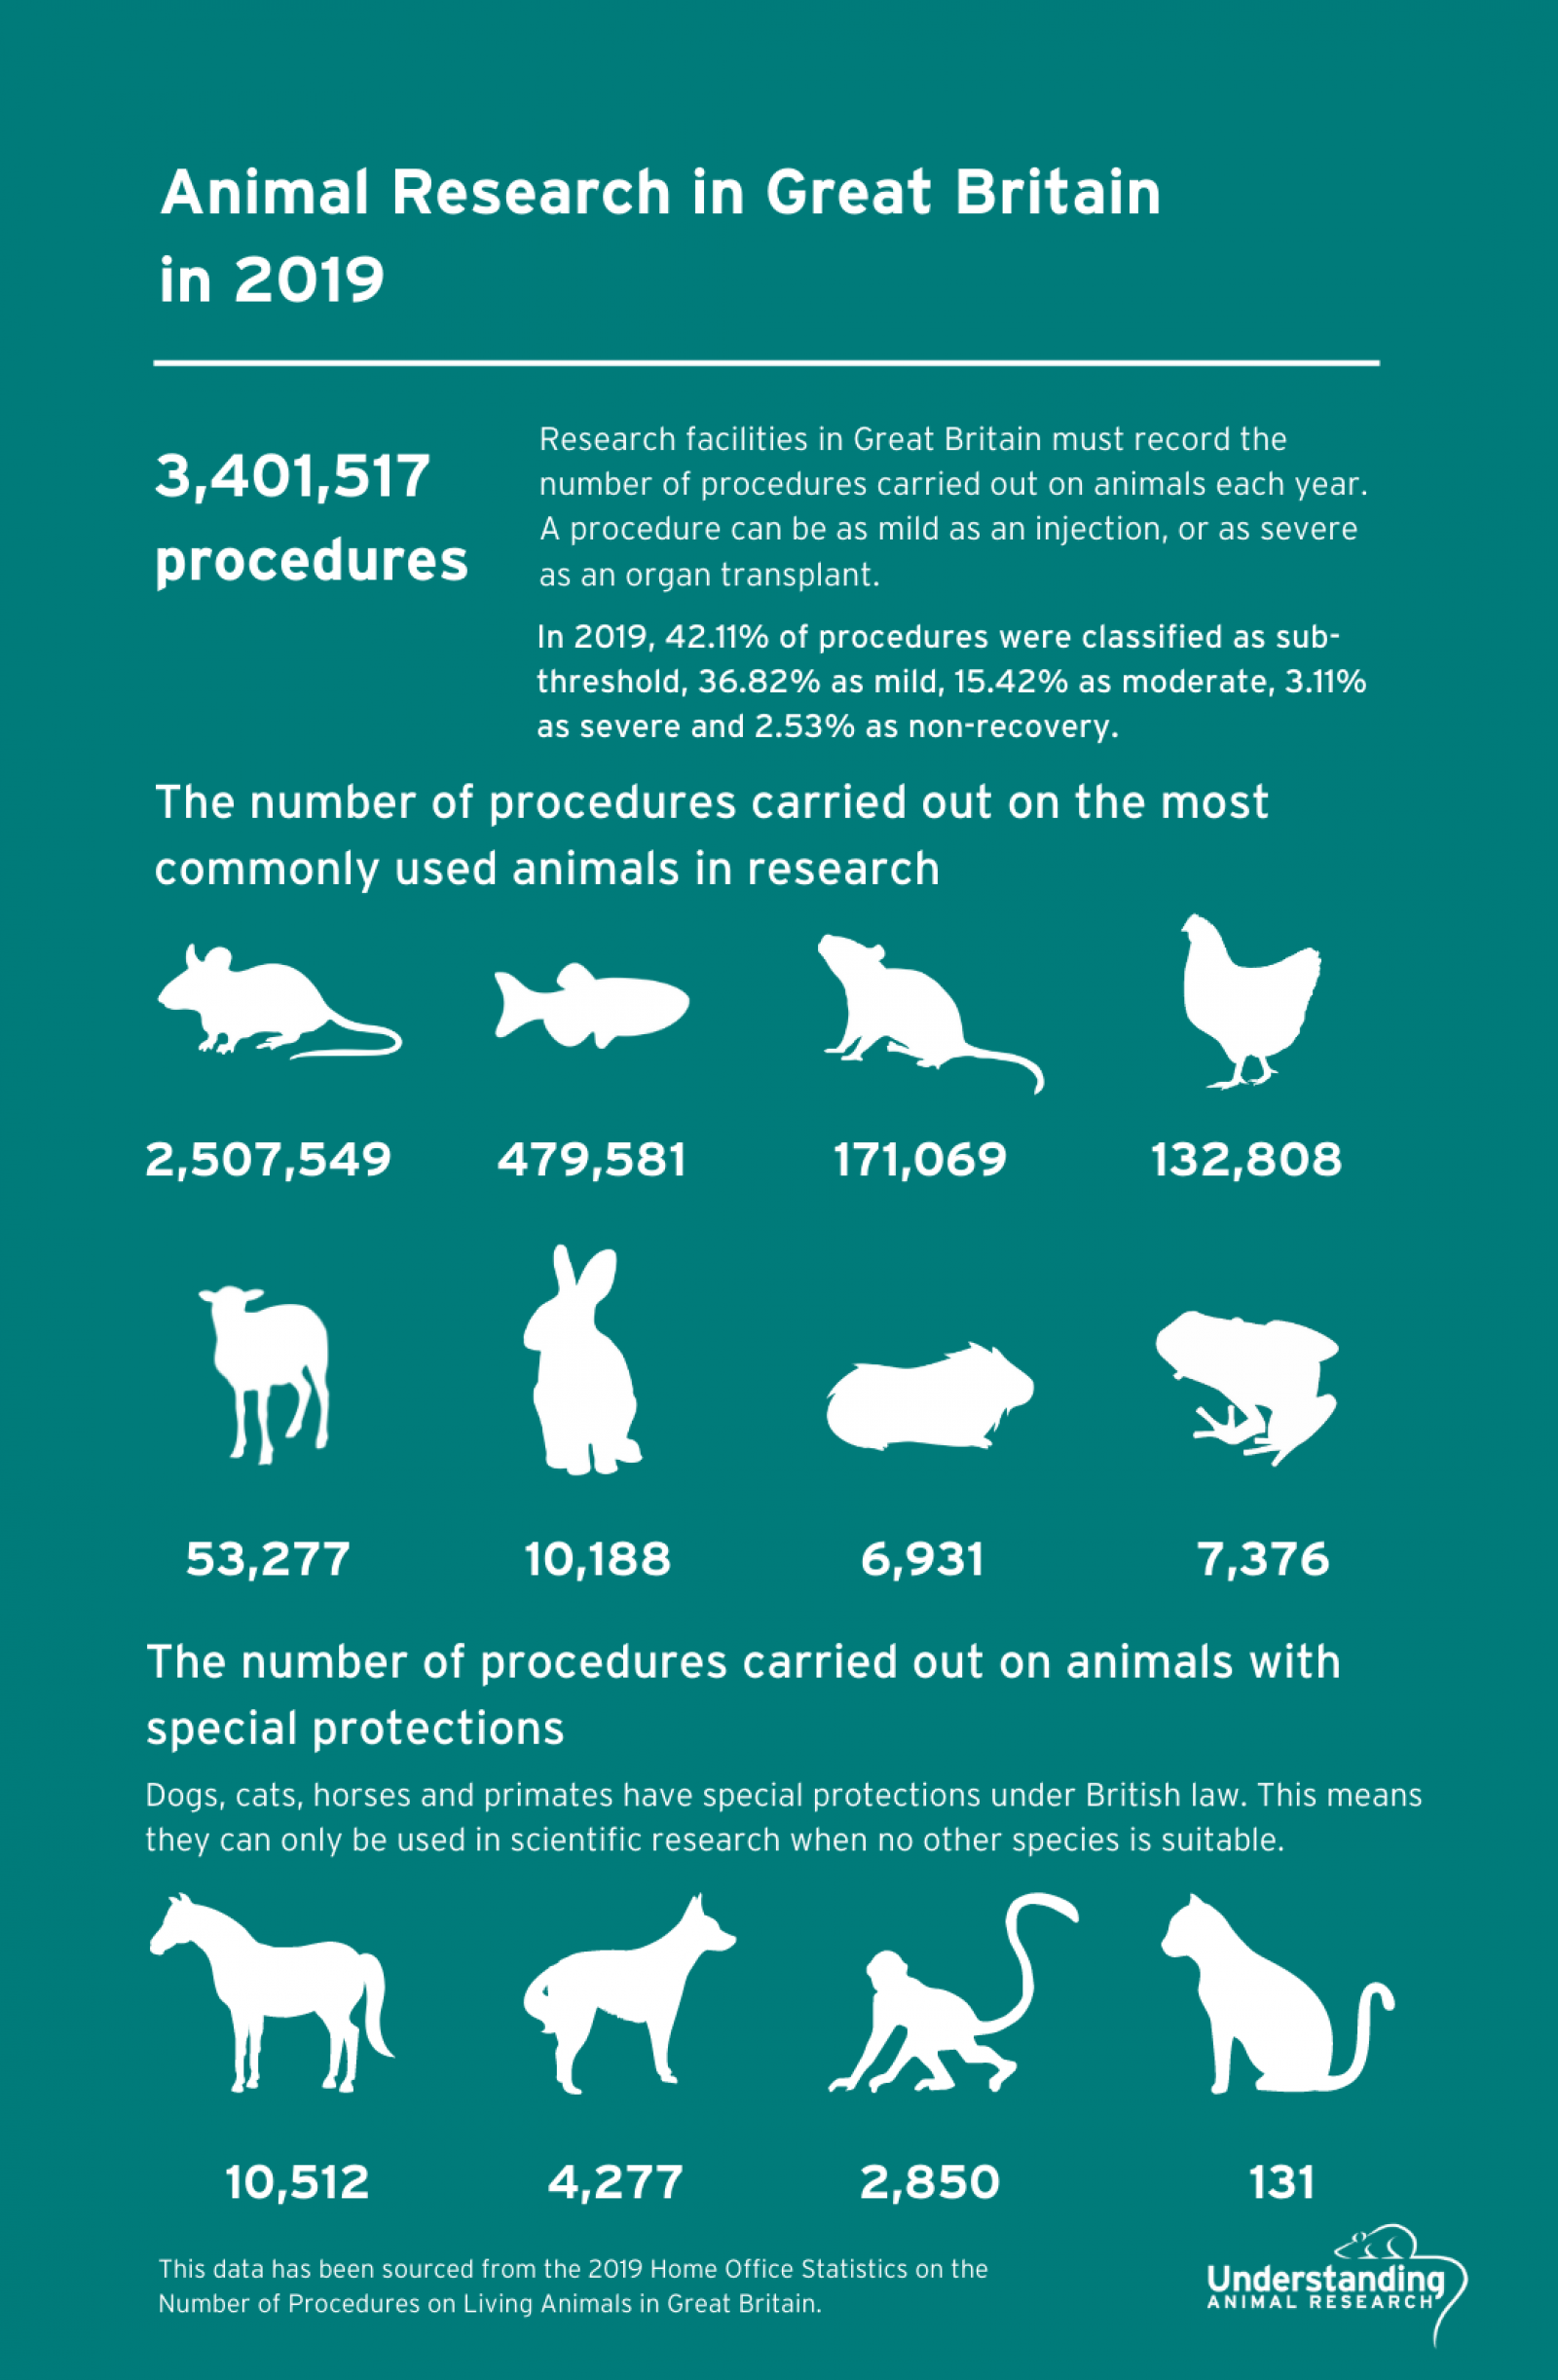 Animal research statistics for Great Britain, 2019